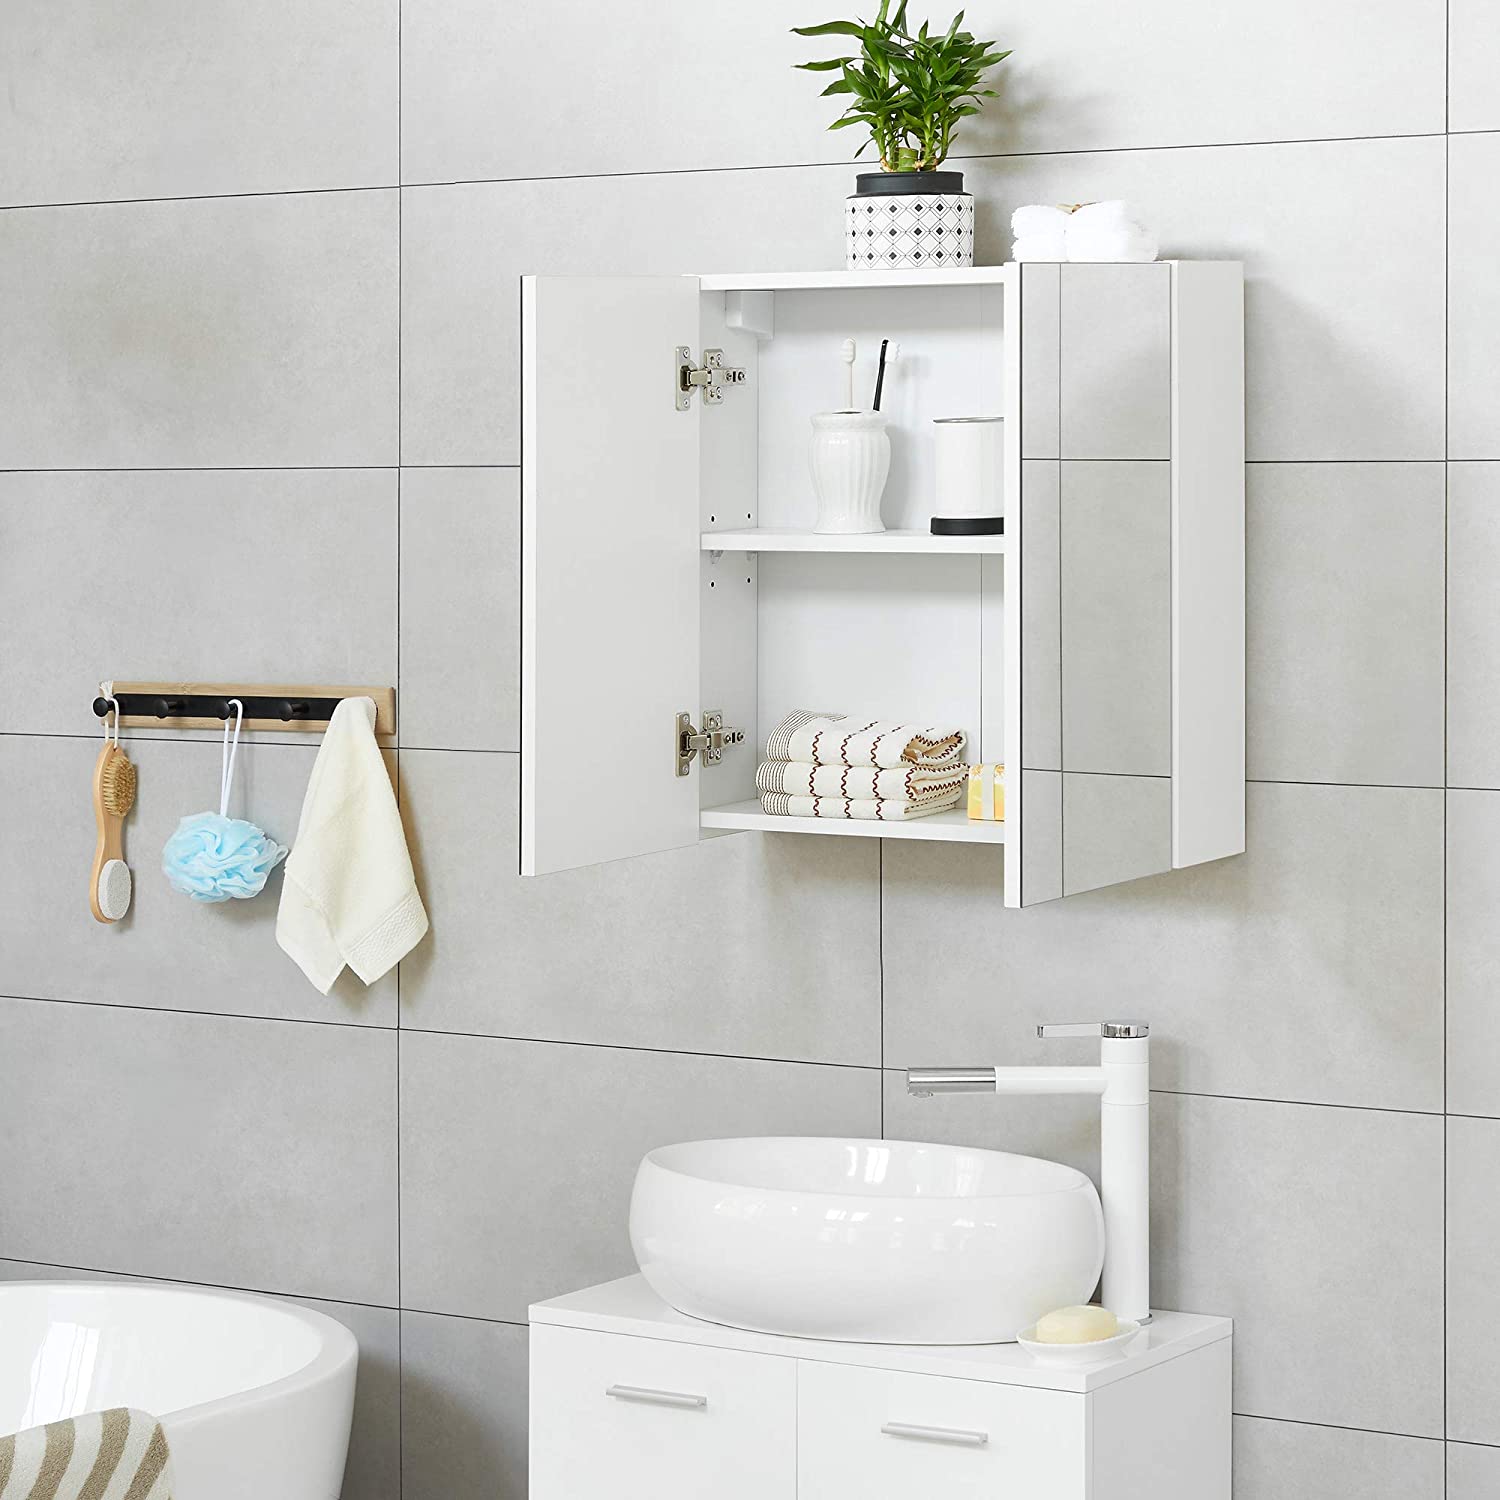 Nancy's Linganore Mirror Cabinet - Bathroom Cabinet - Wall Cabinet - Double Door - Modern - Wall Mounted - White - 54 x 15 x 55 cm 